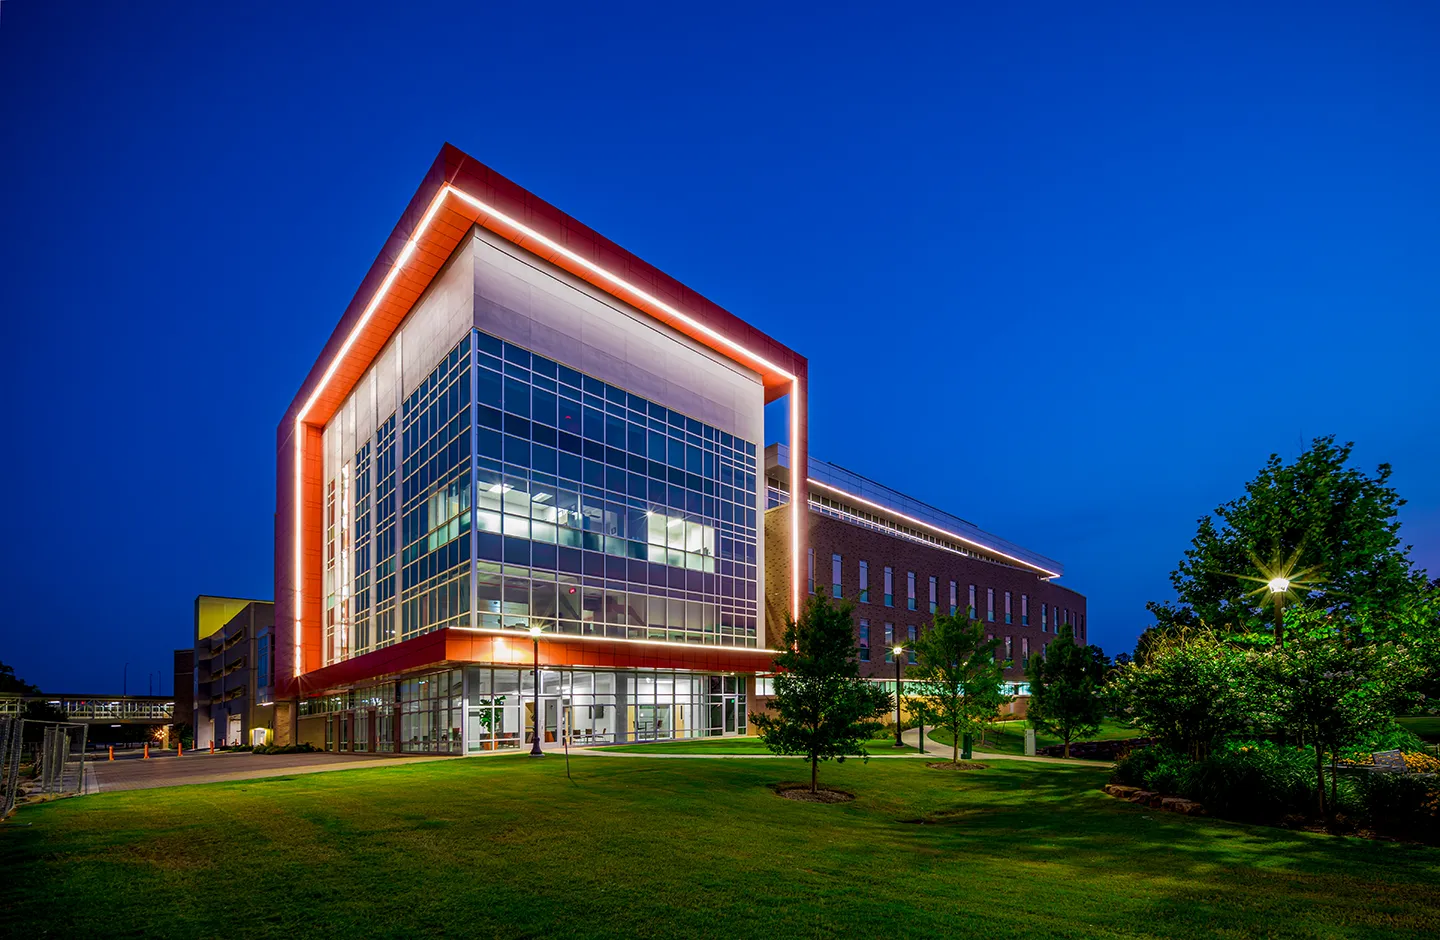 Exterior LED lighting reinforces OSU’s bright orange brand and highlights the building’s unique angled features, adding nighttime visual interest to the elevated site.